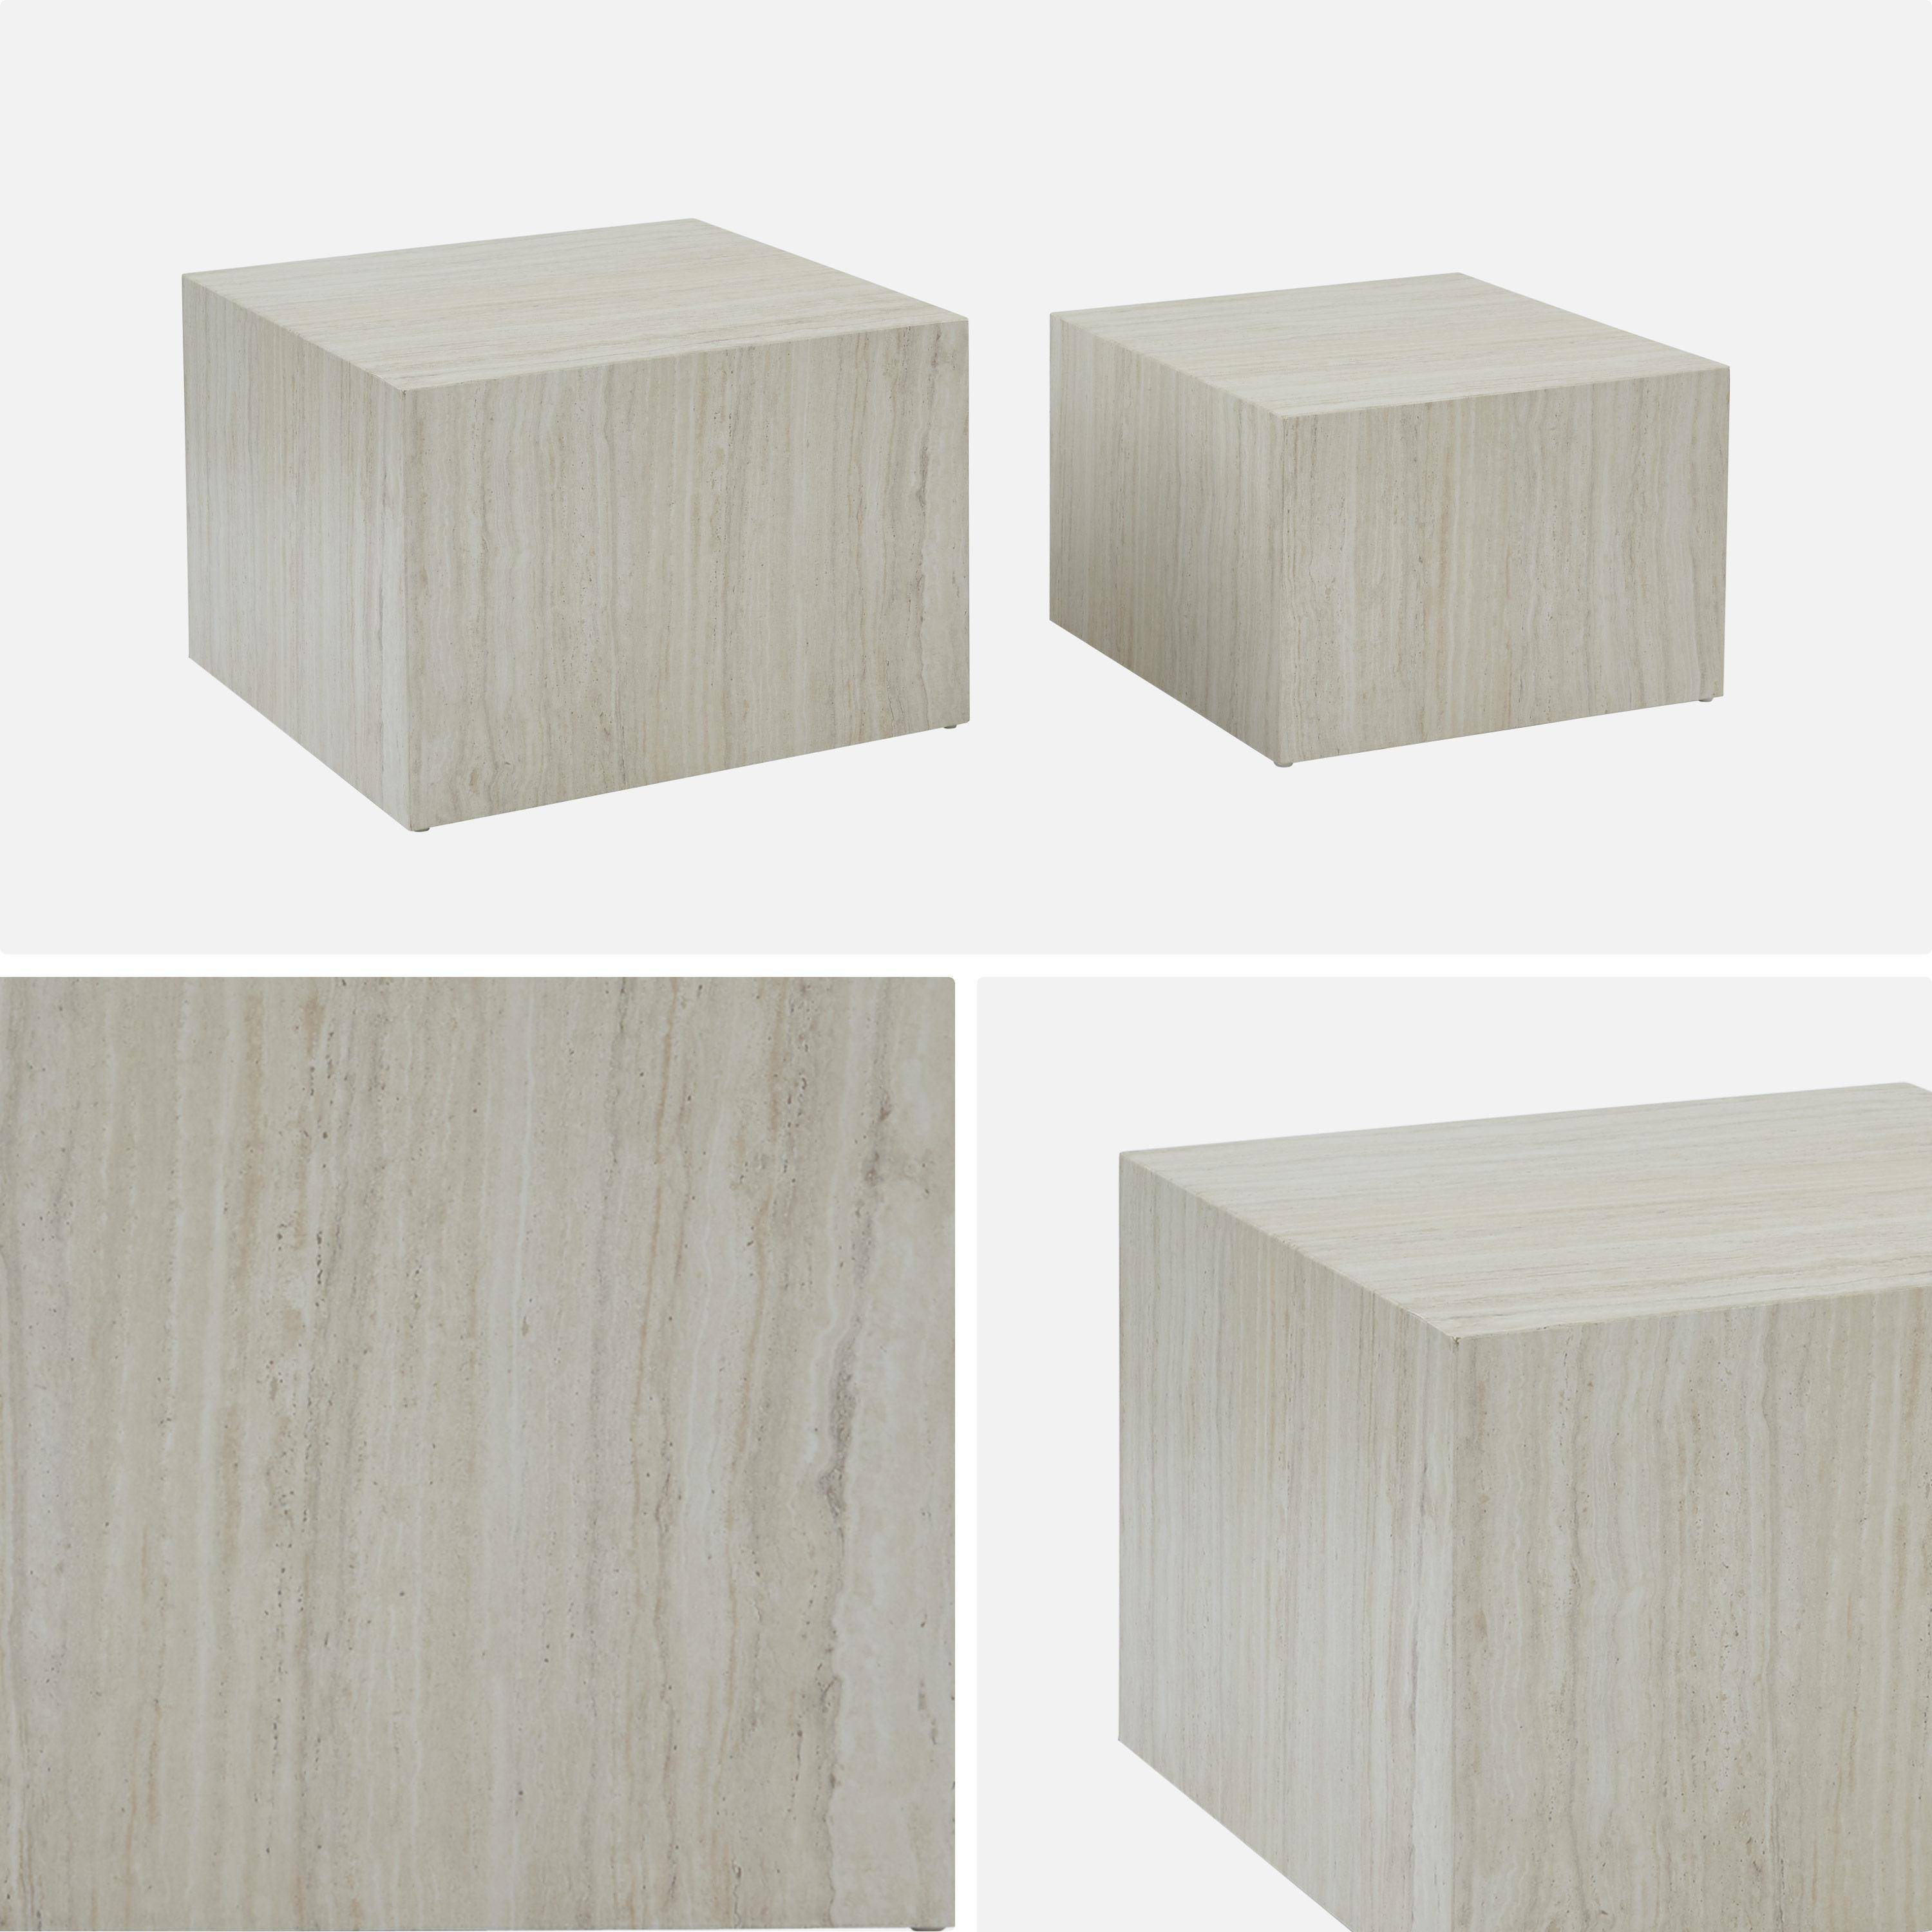 Set of 2 square coffee tables with marble effect, white, L50xW50xH33cm &  L58xW58xH40cm, Paros,sweeek,Photo7